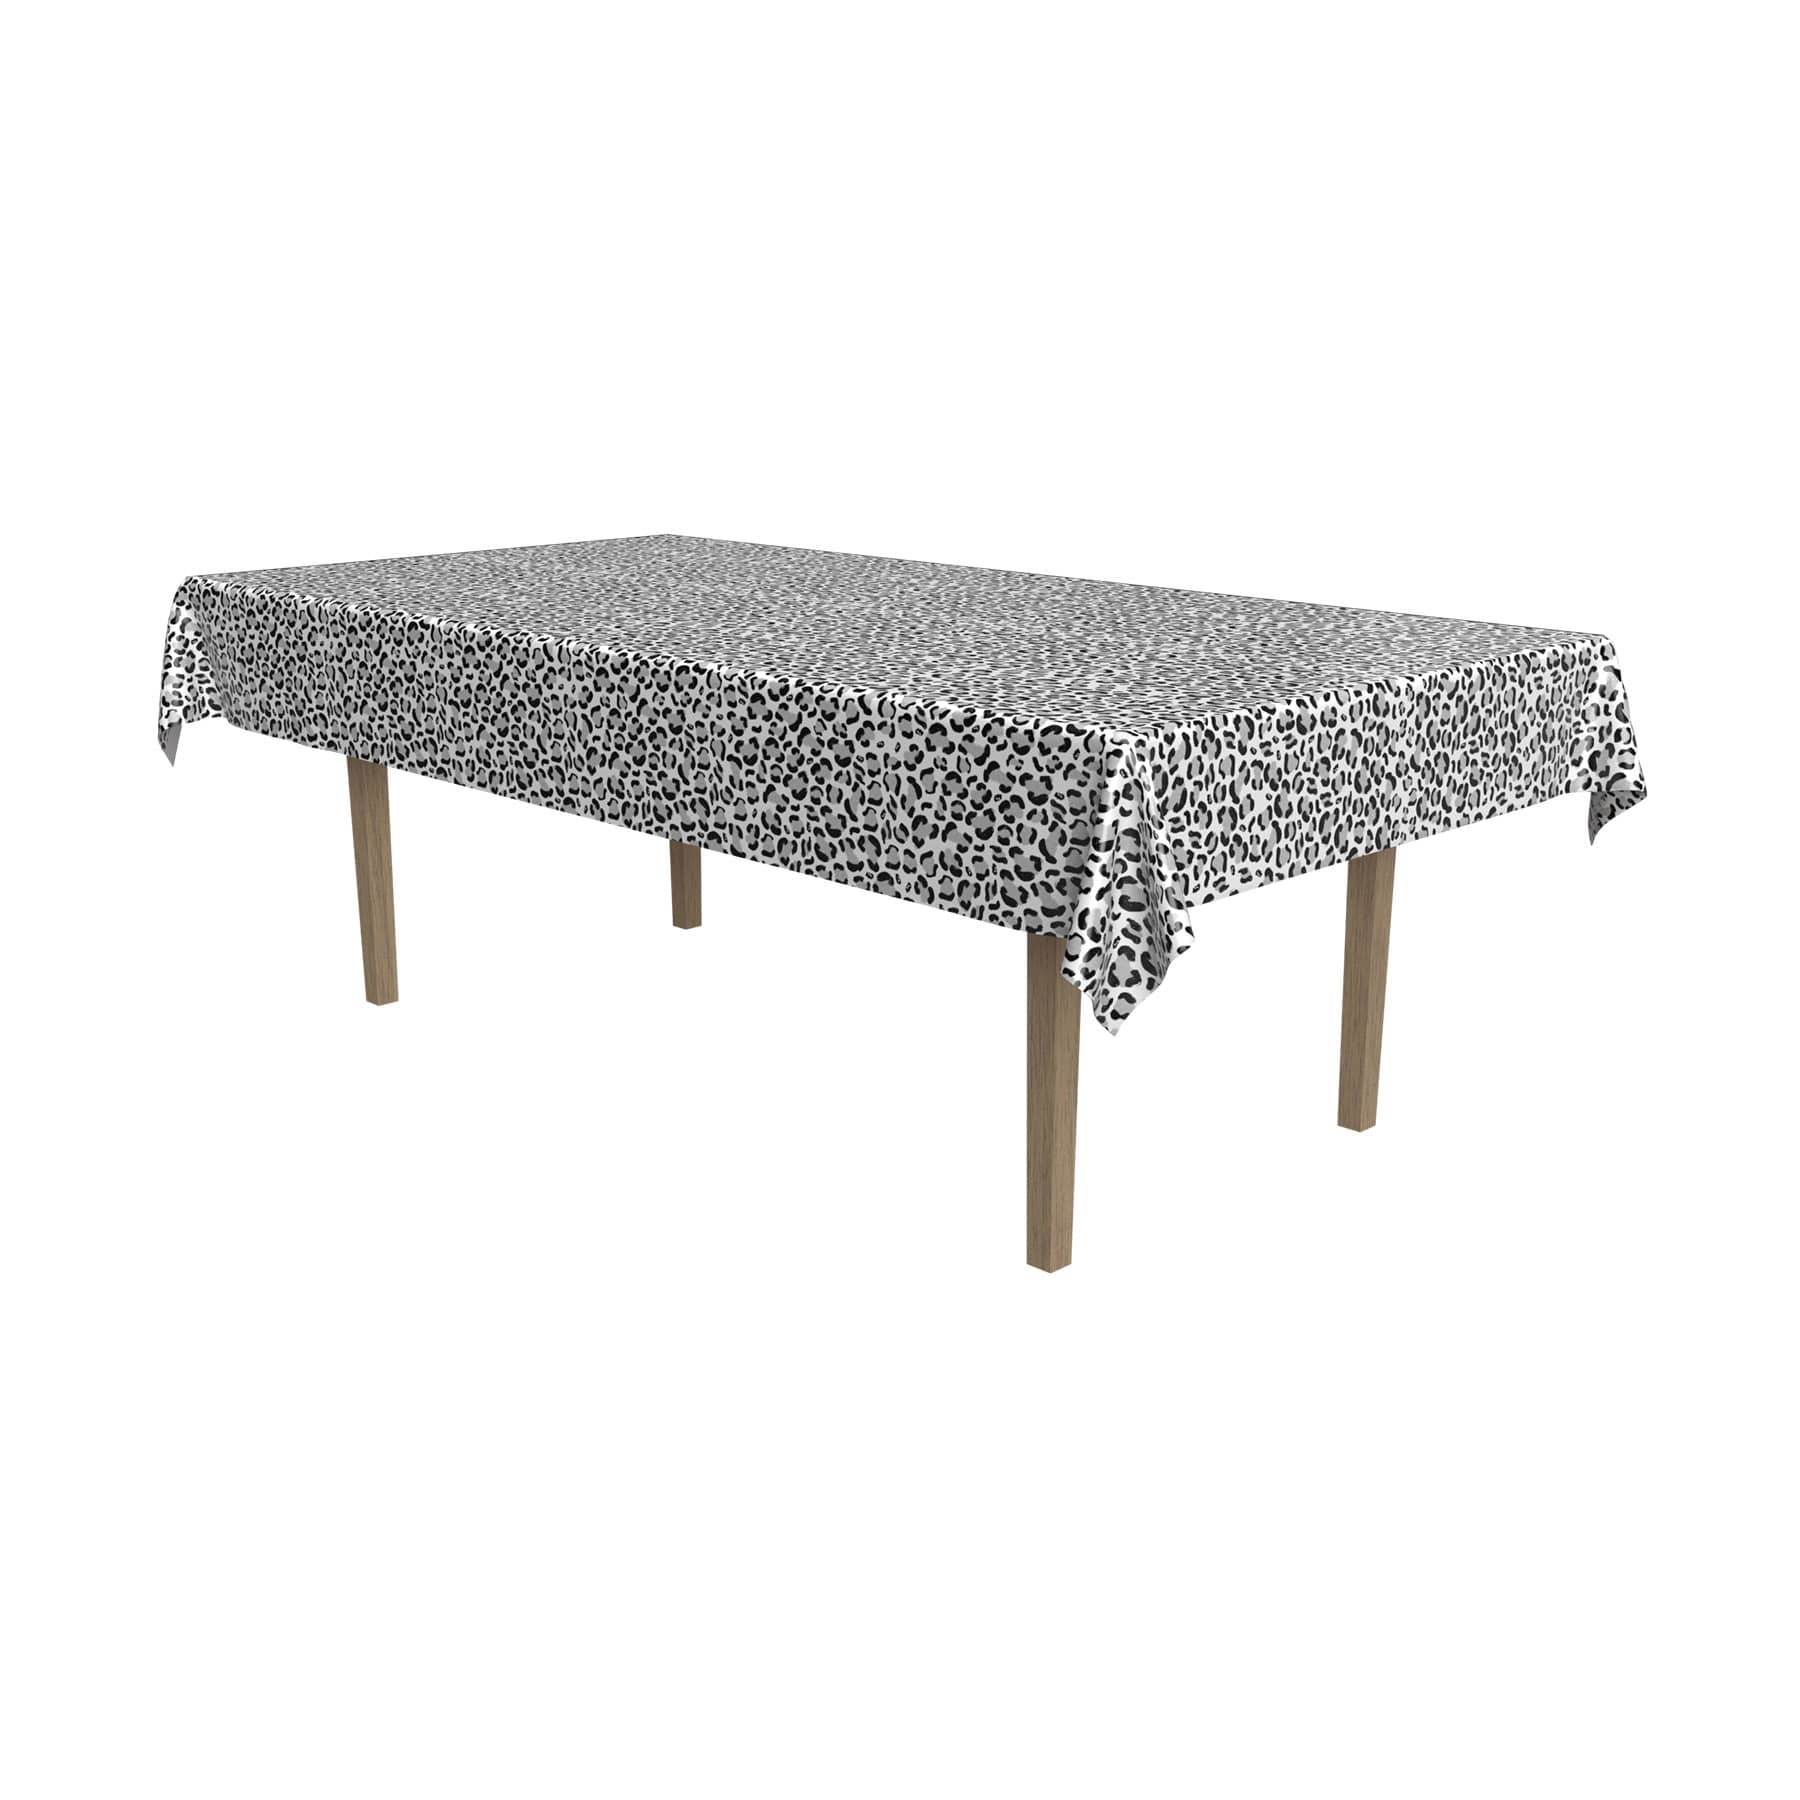 Snow Leopard Print Tablecover